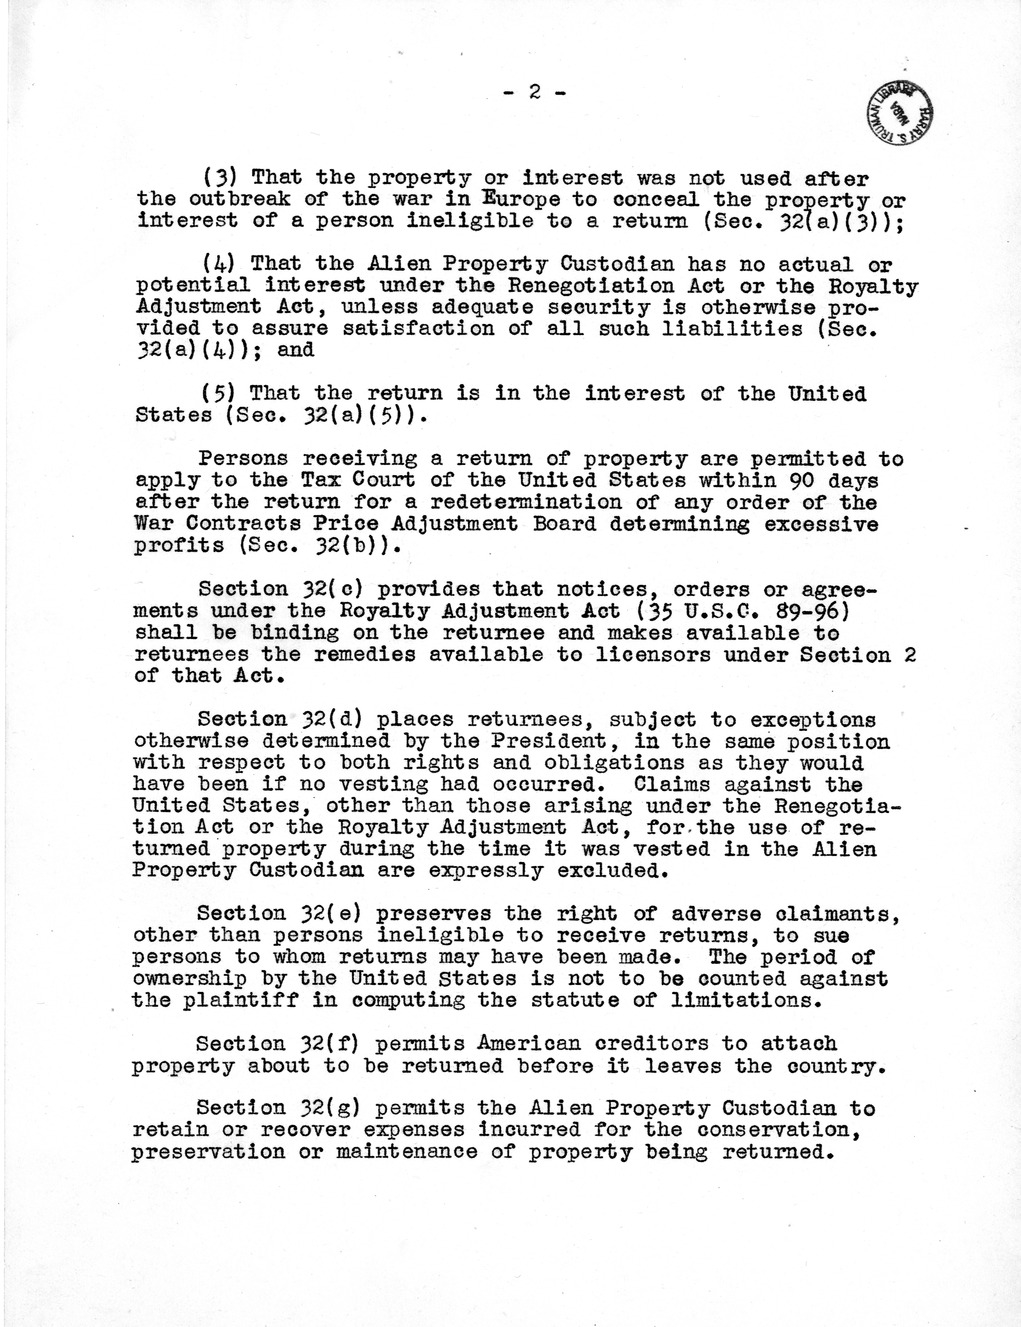 Memorandum from Harold D. Smith to M. C. Latta, H. R. 4571, To Amend the First War Powers Act, 1941, with Attachments